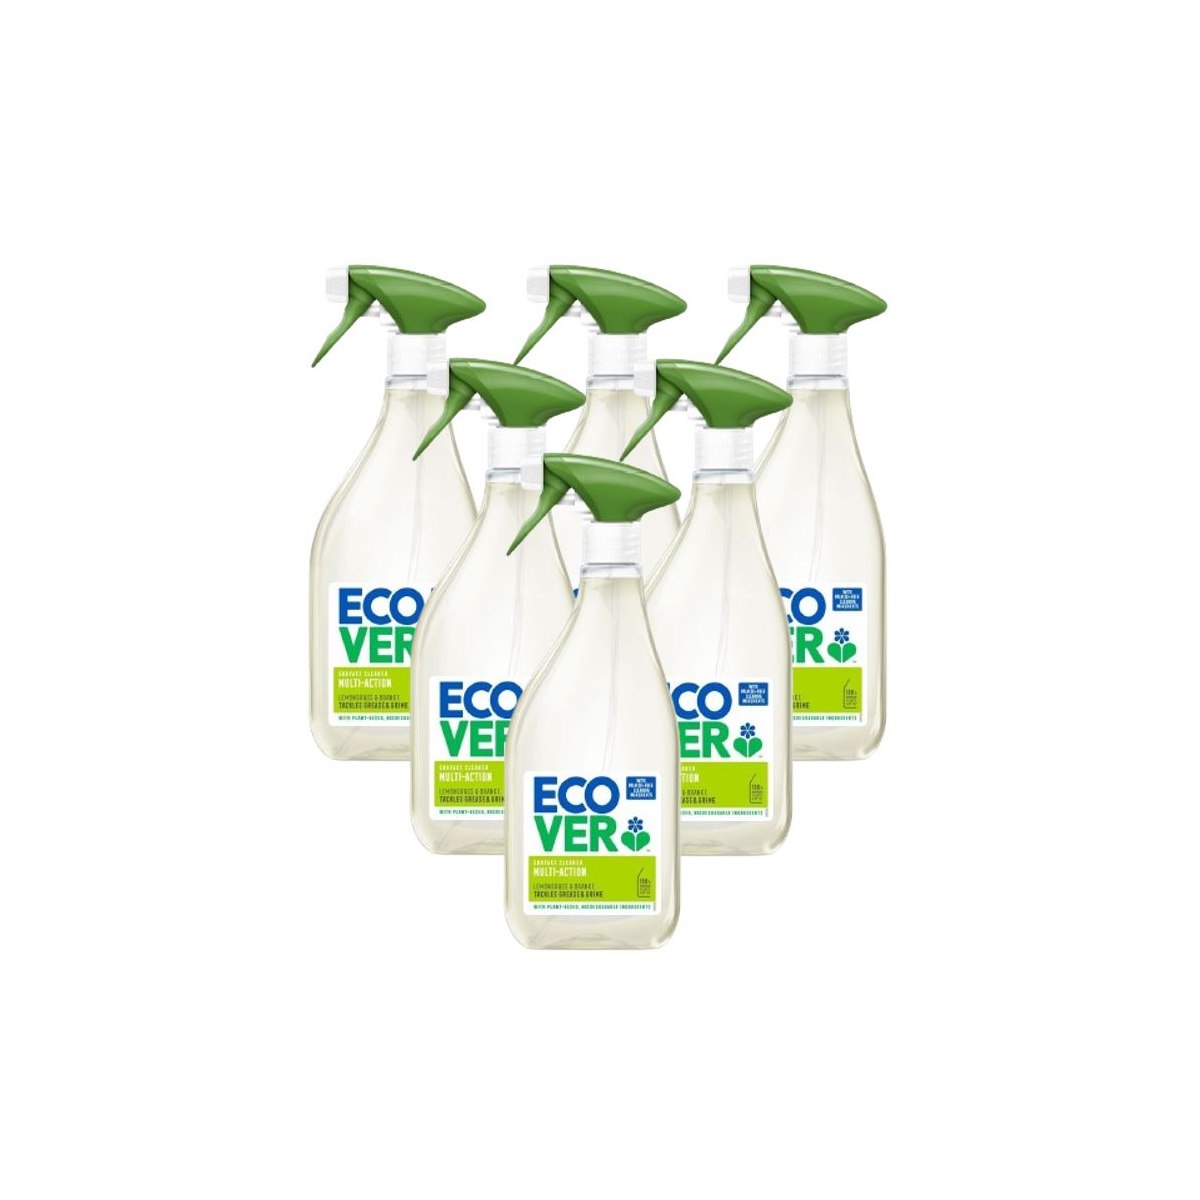 Case of 6 x Ecover Multi-Action Surface Cleaner Spray Lemongrass and Orange 500ml